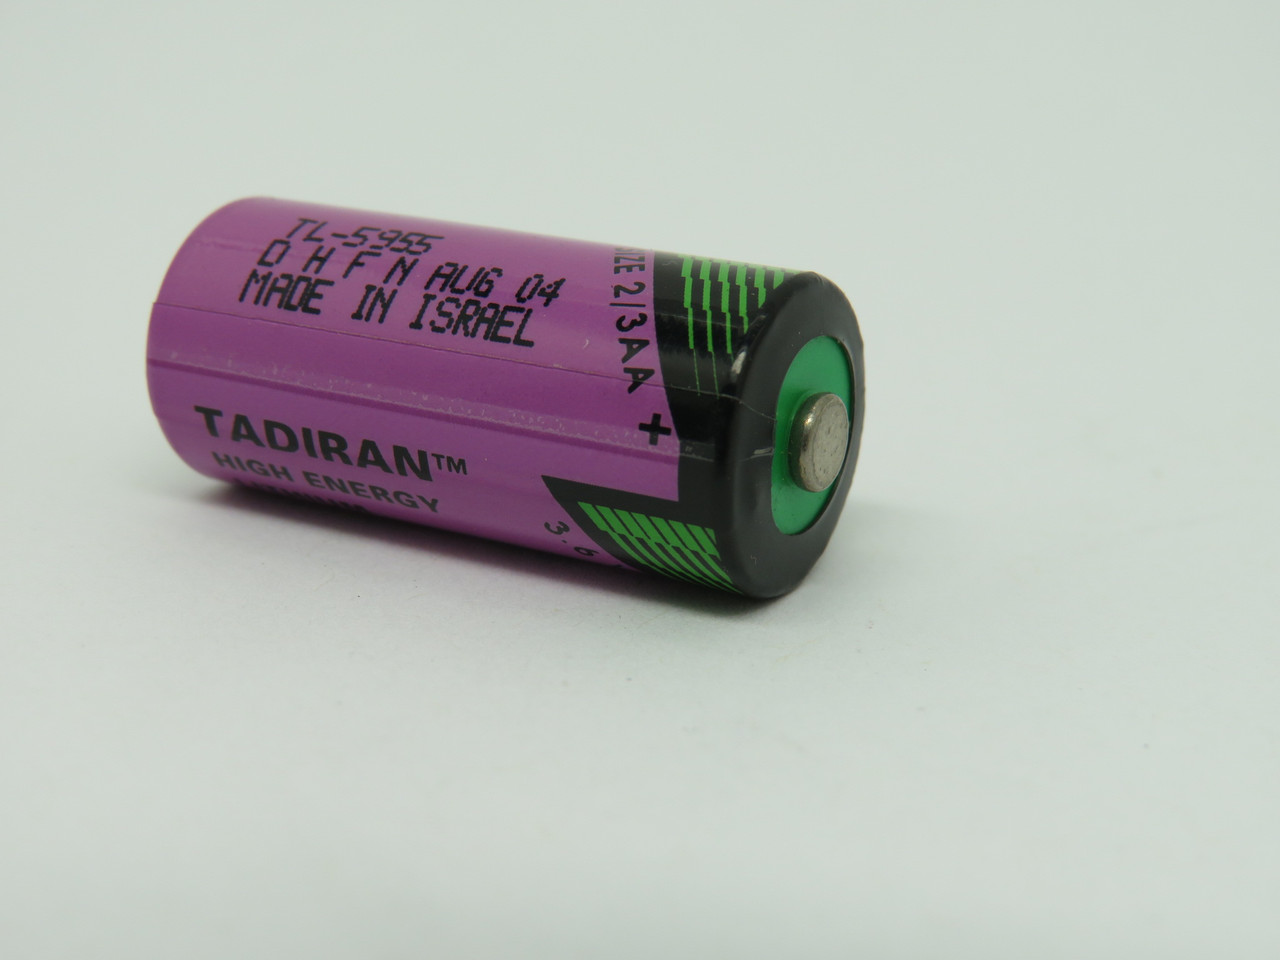 Tadiran TL-5955 High Energy Lithium Battery 3.6V Size 2/3AA USED